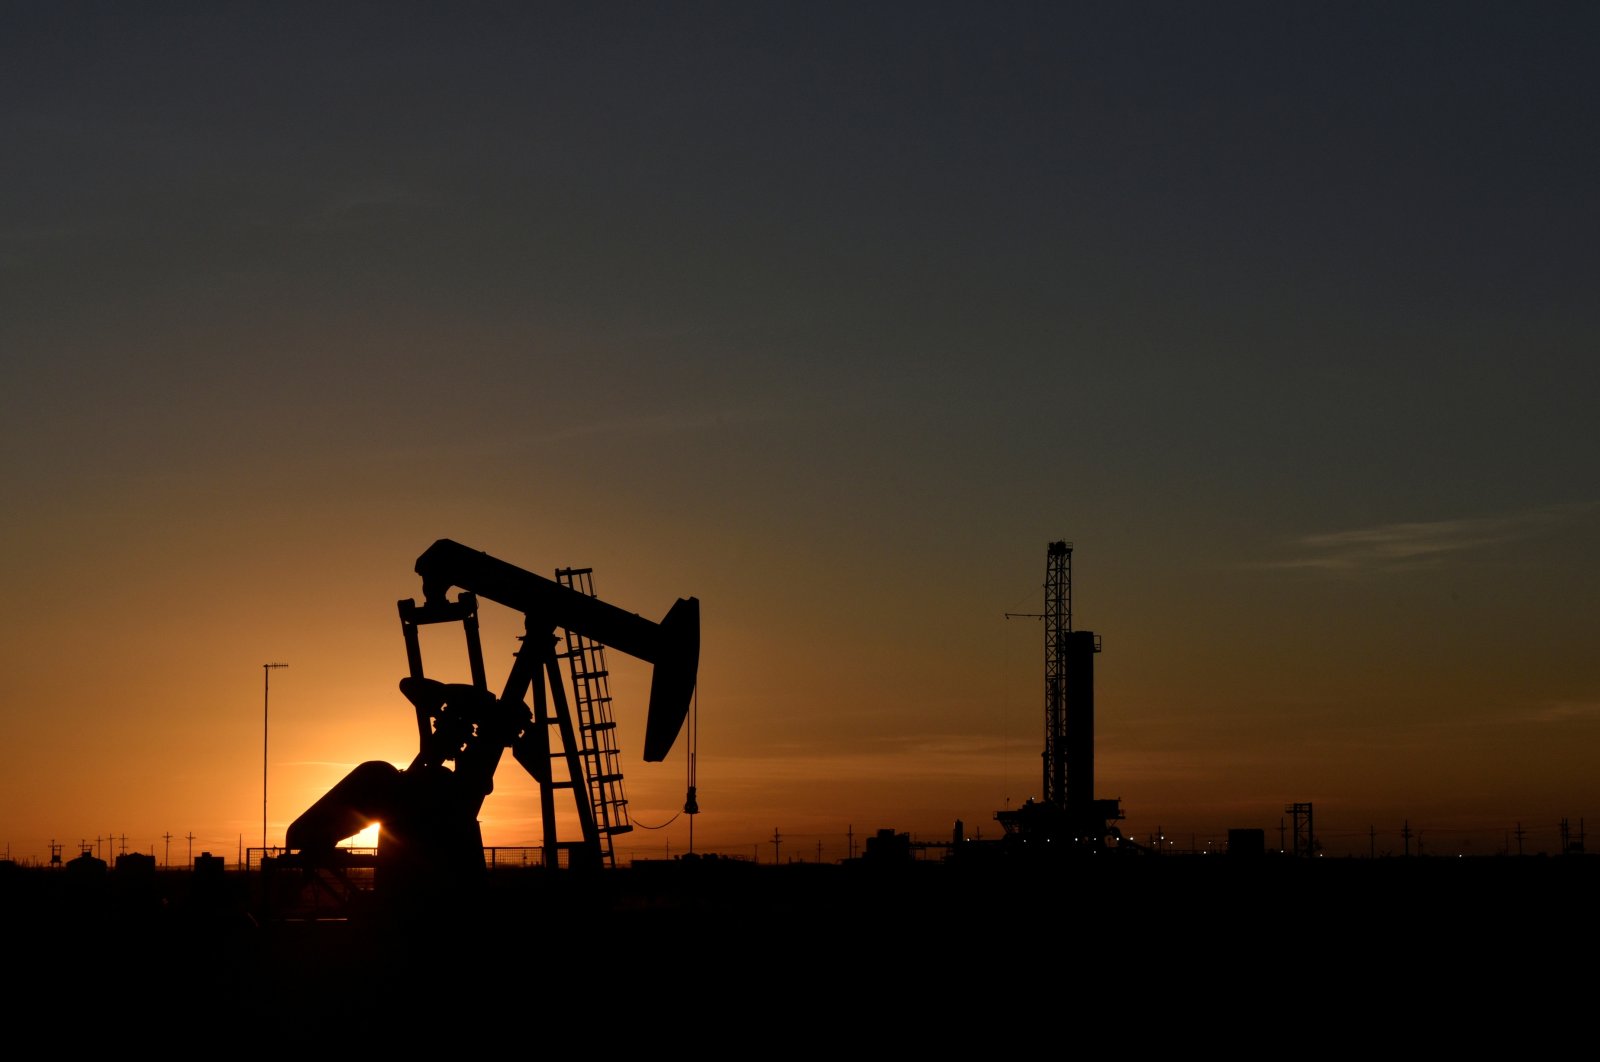 A pump jack operates in front of a drilling rig at sunset in an oil field in Midland, Texas U.S. August 22, 2018. (Reuters Photo)